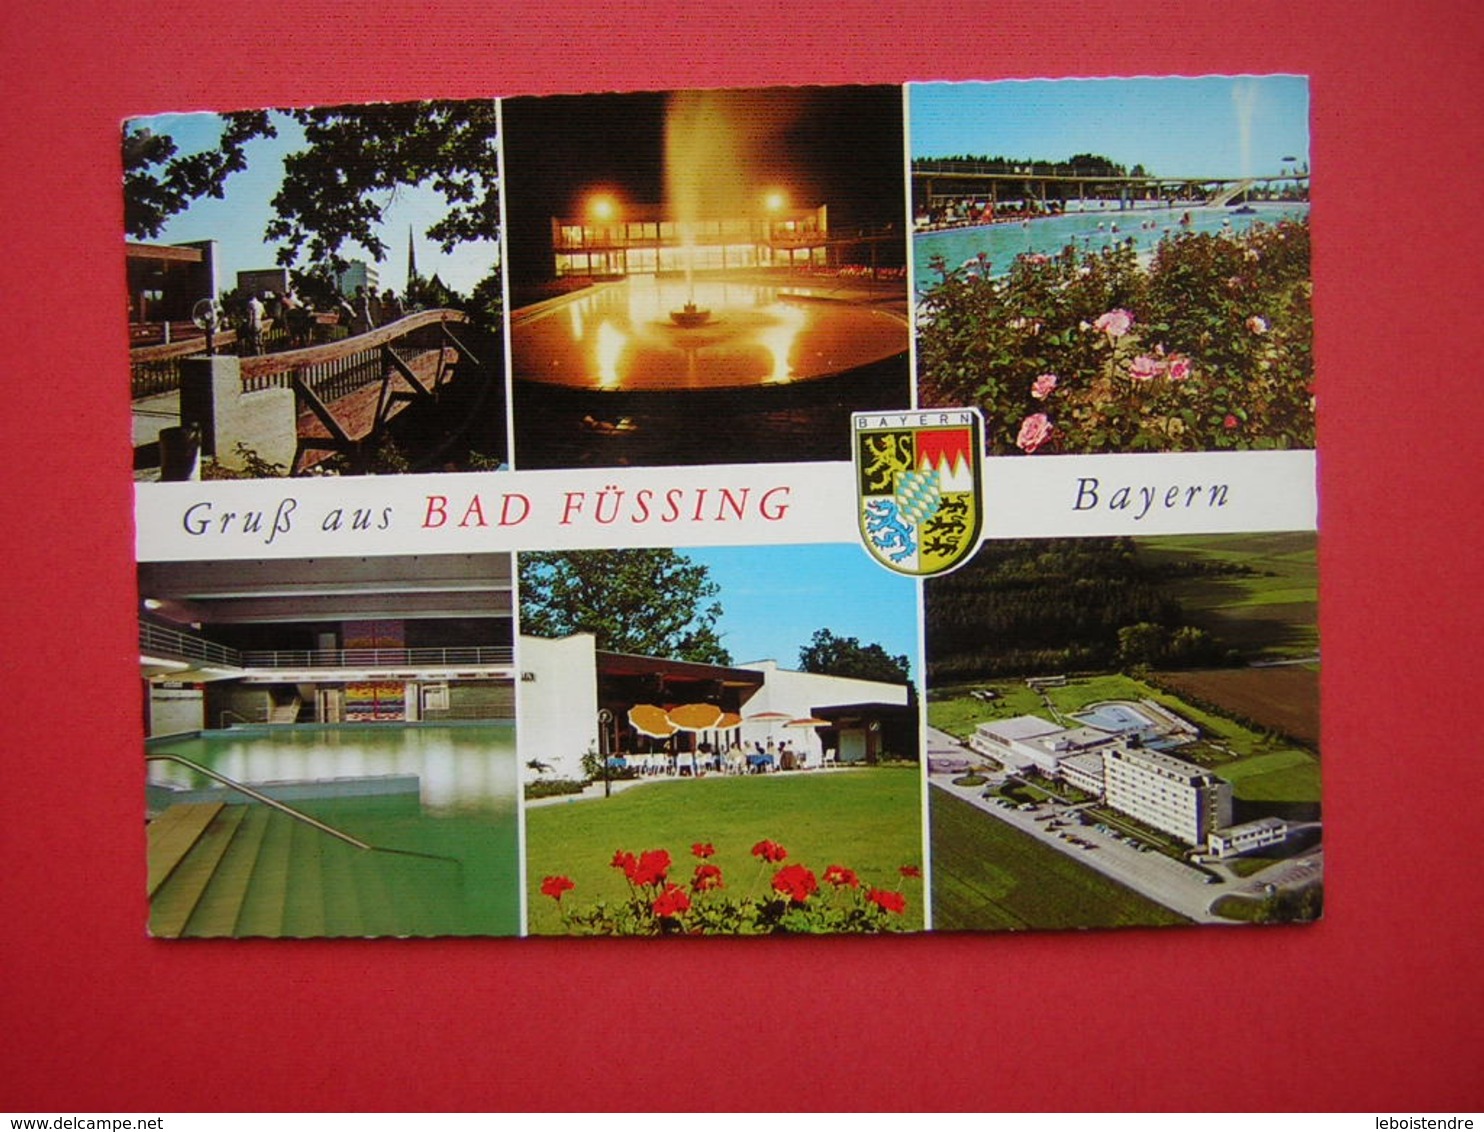 CPSM ALLEMAGNE MULTI VUES  GRUB AUS BAD FUSSING BAYERN    VOYAGEE 1973 TIMBRE - Bad Fuessing